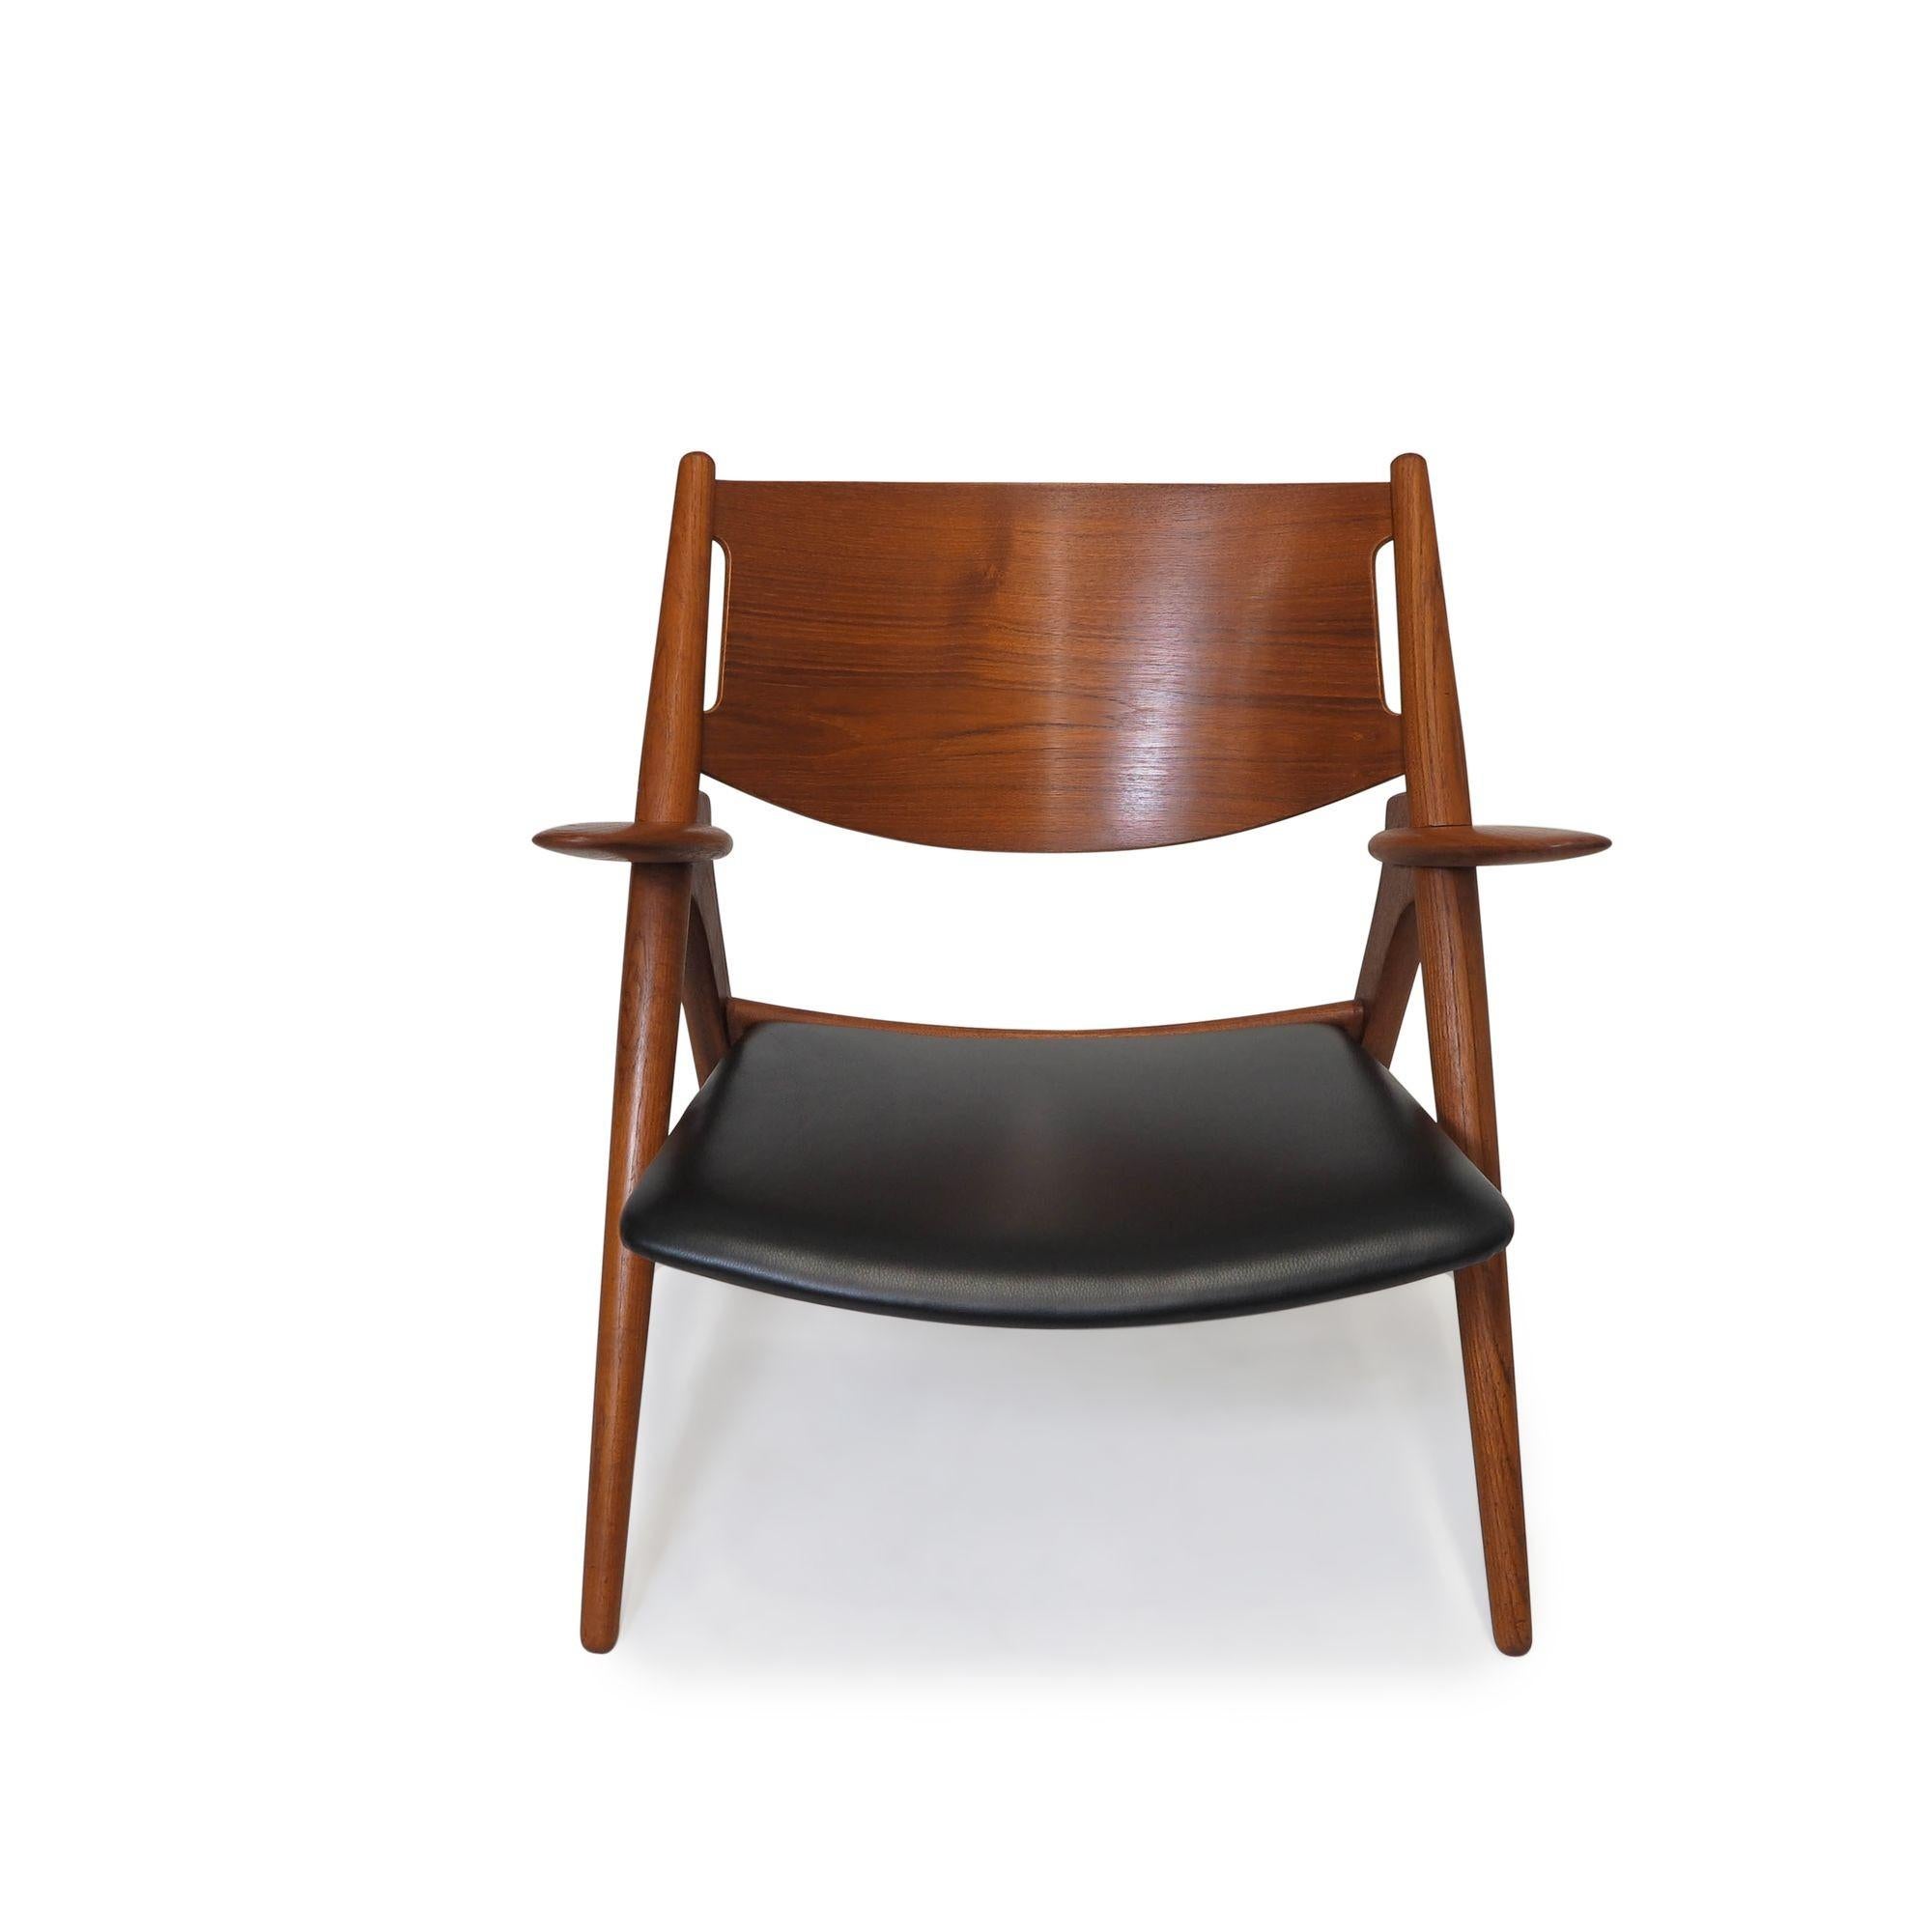 Model CH28, “Sawbuck” Danish lounge chair designed by Hans Wegner and produced by Carl Hansen in Denmark, 1951. The chair features a simple and elegant design, with a distinctive X-shaped frame that gives it a modern, yet timeless, appearance. The